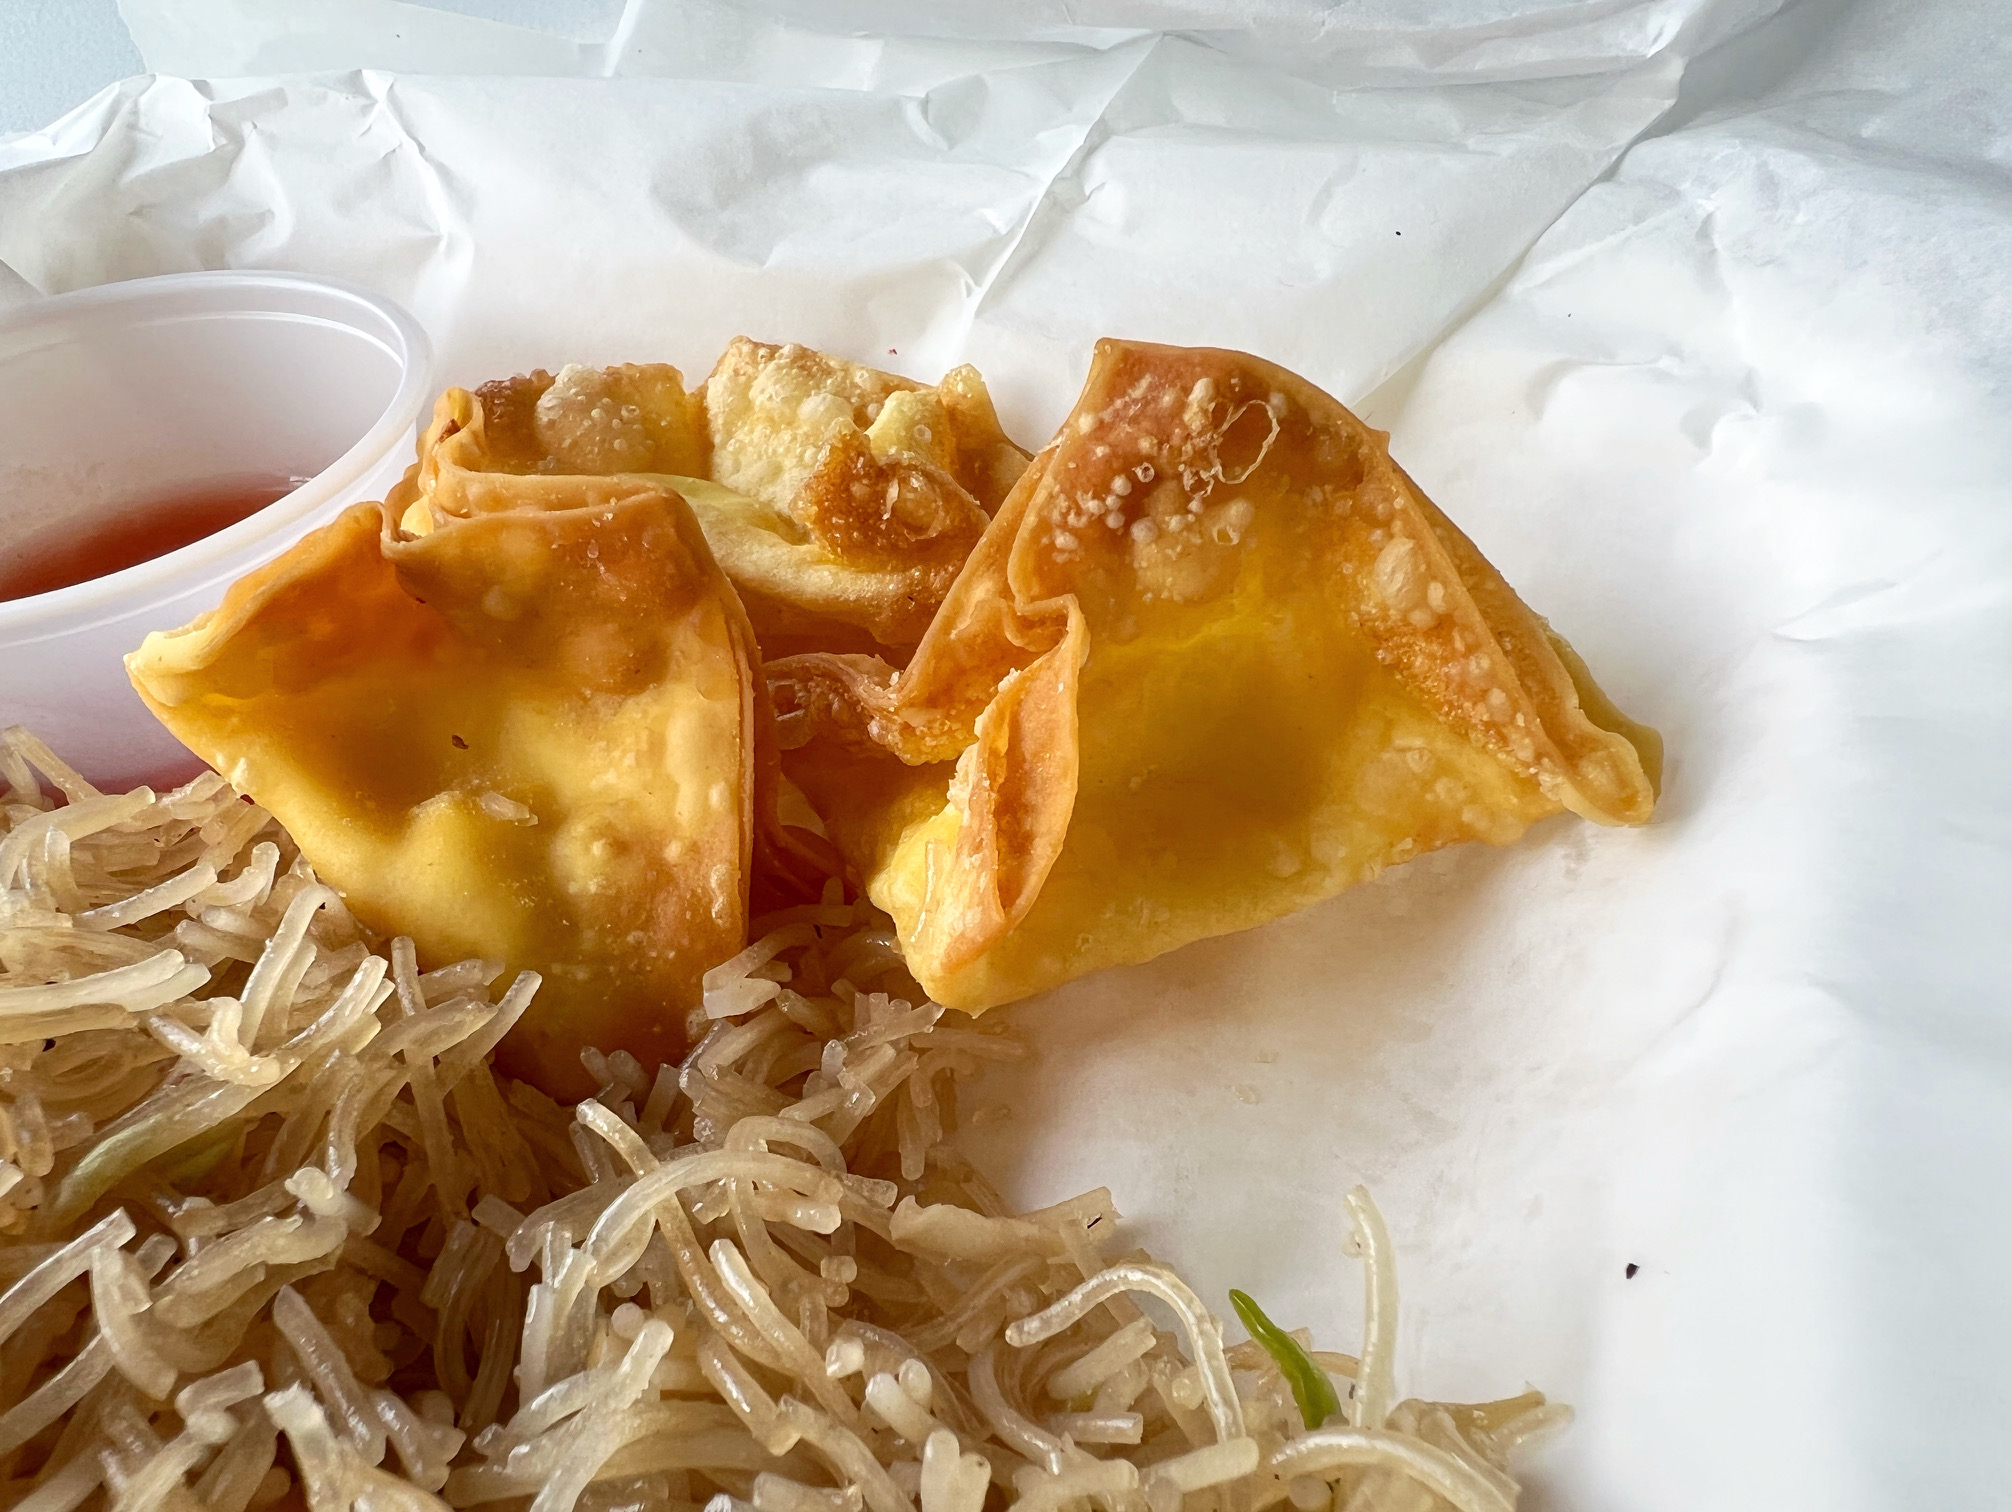 A close up of rangoons from Maria's Kitchen. Photo by Alyssa Buckley.